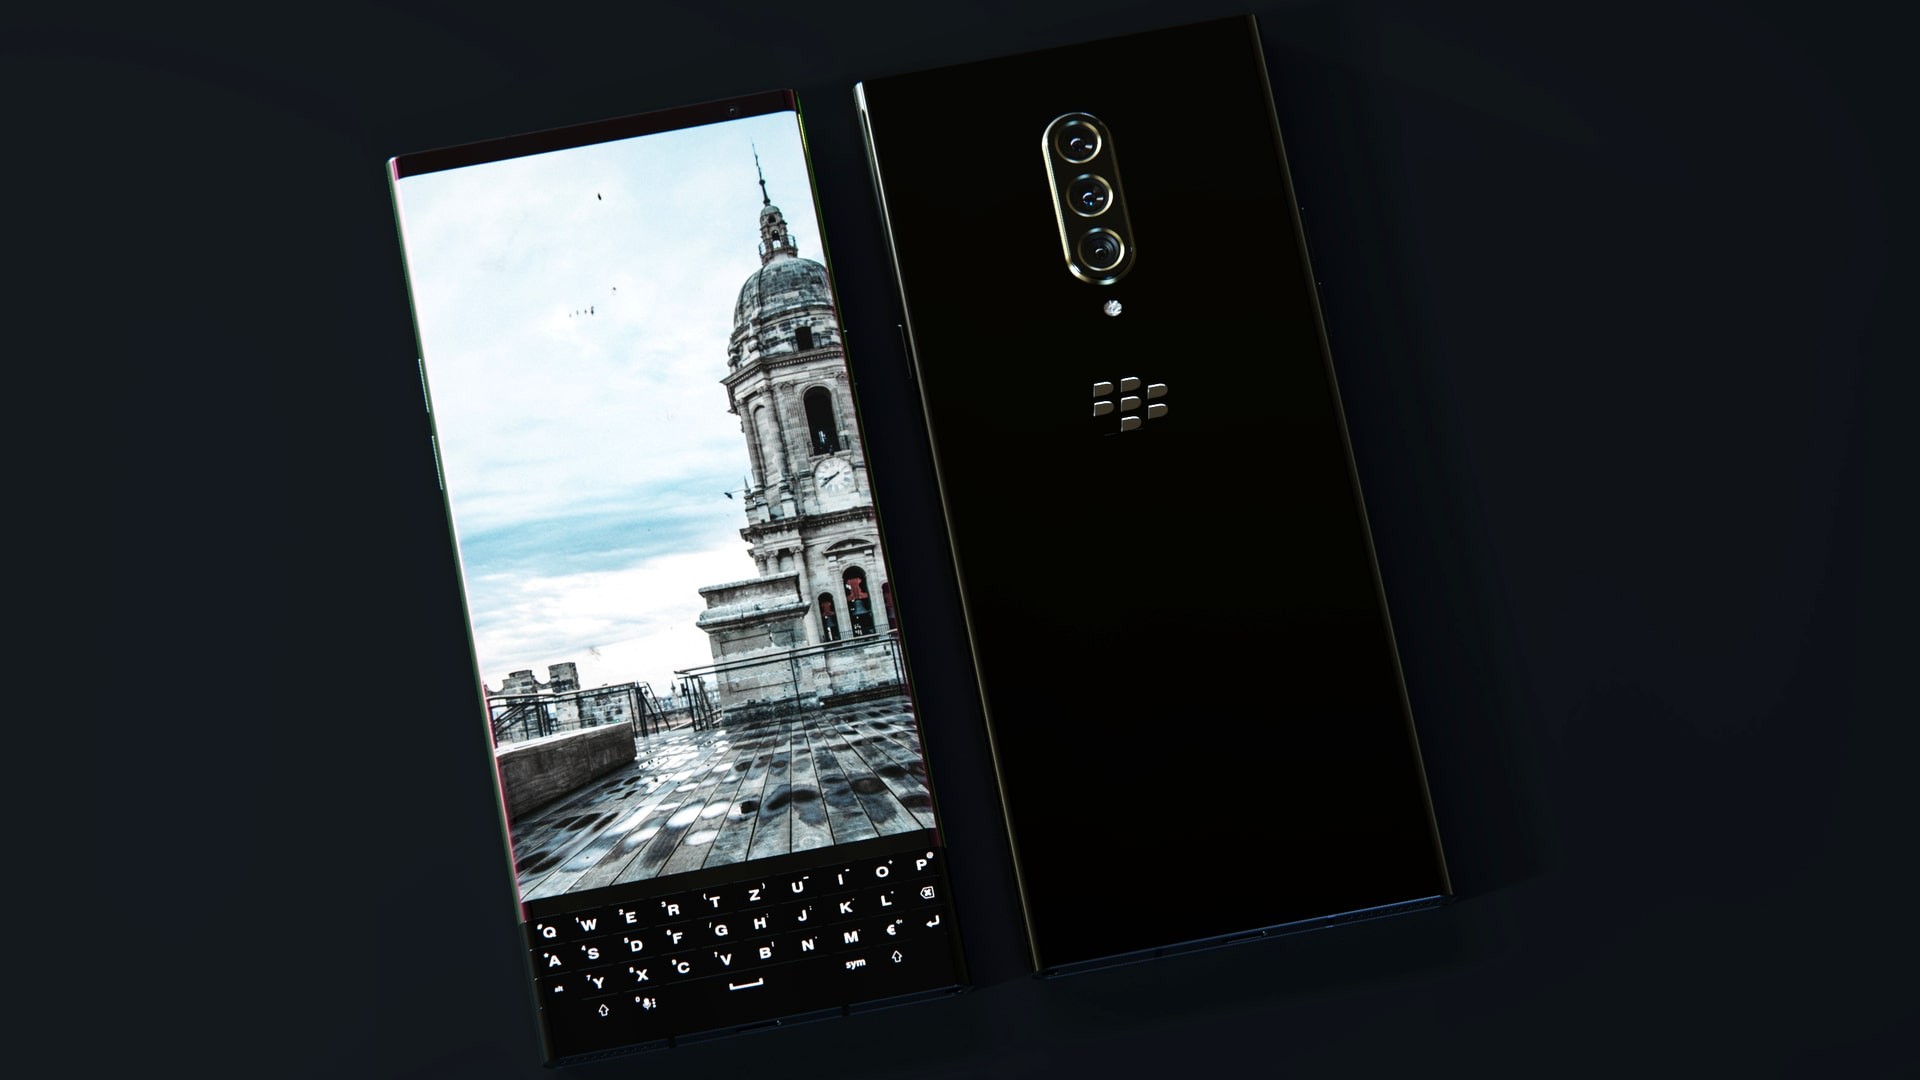 BlackBerry 5G phones with a keyboard are in development